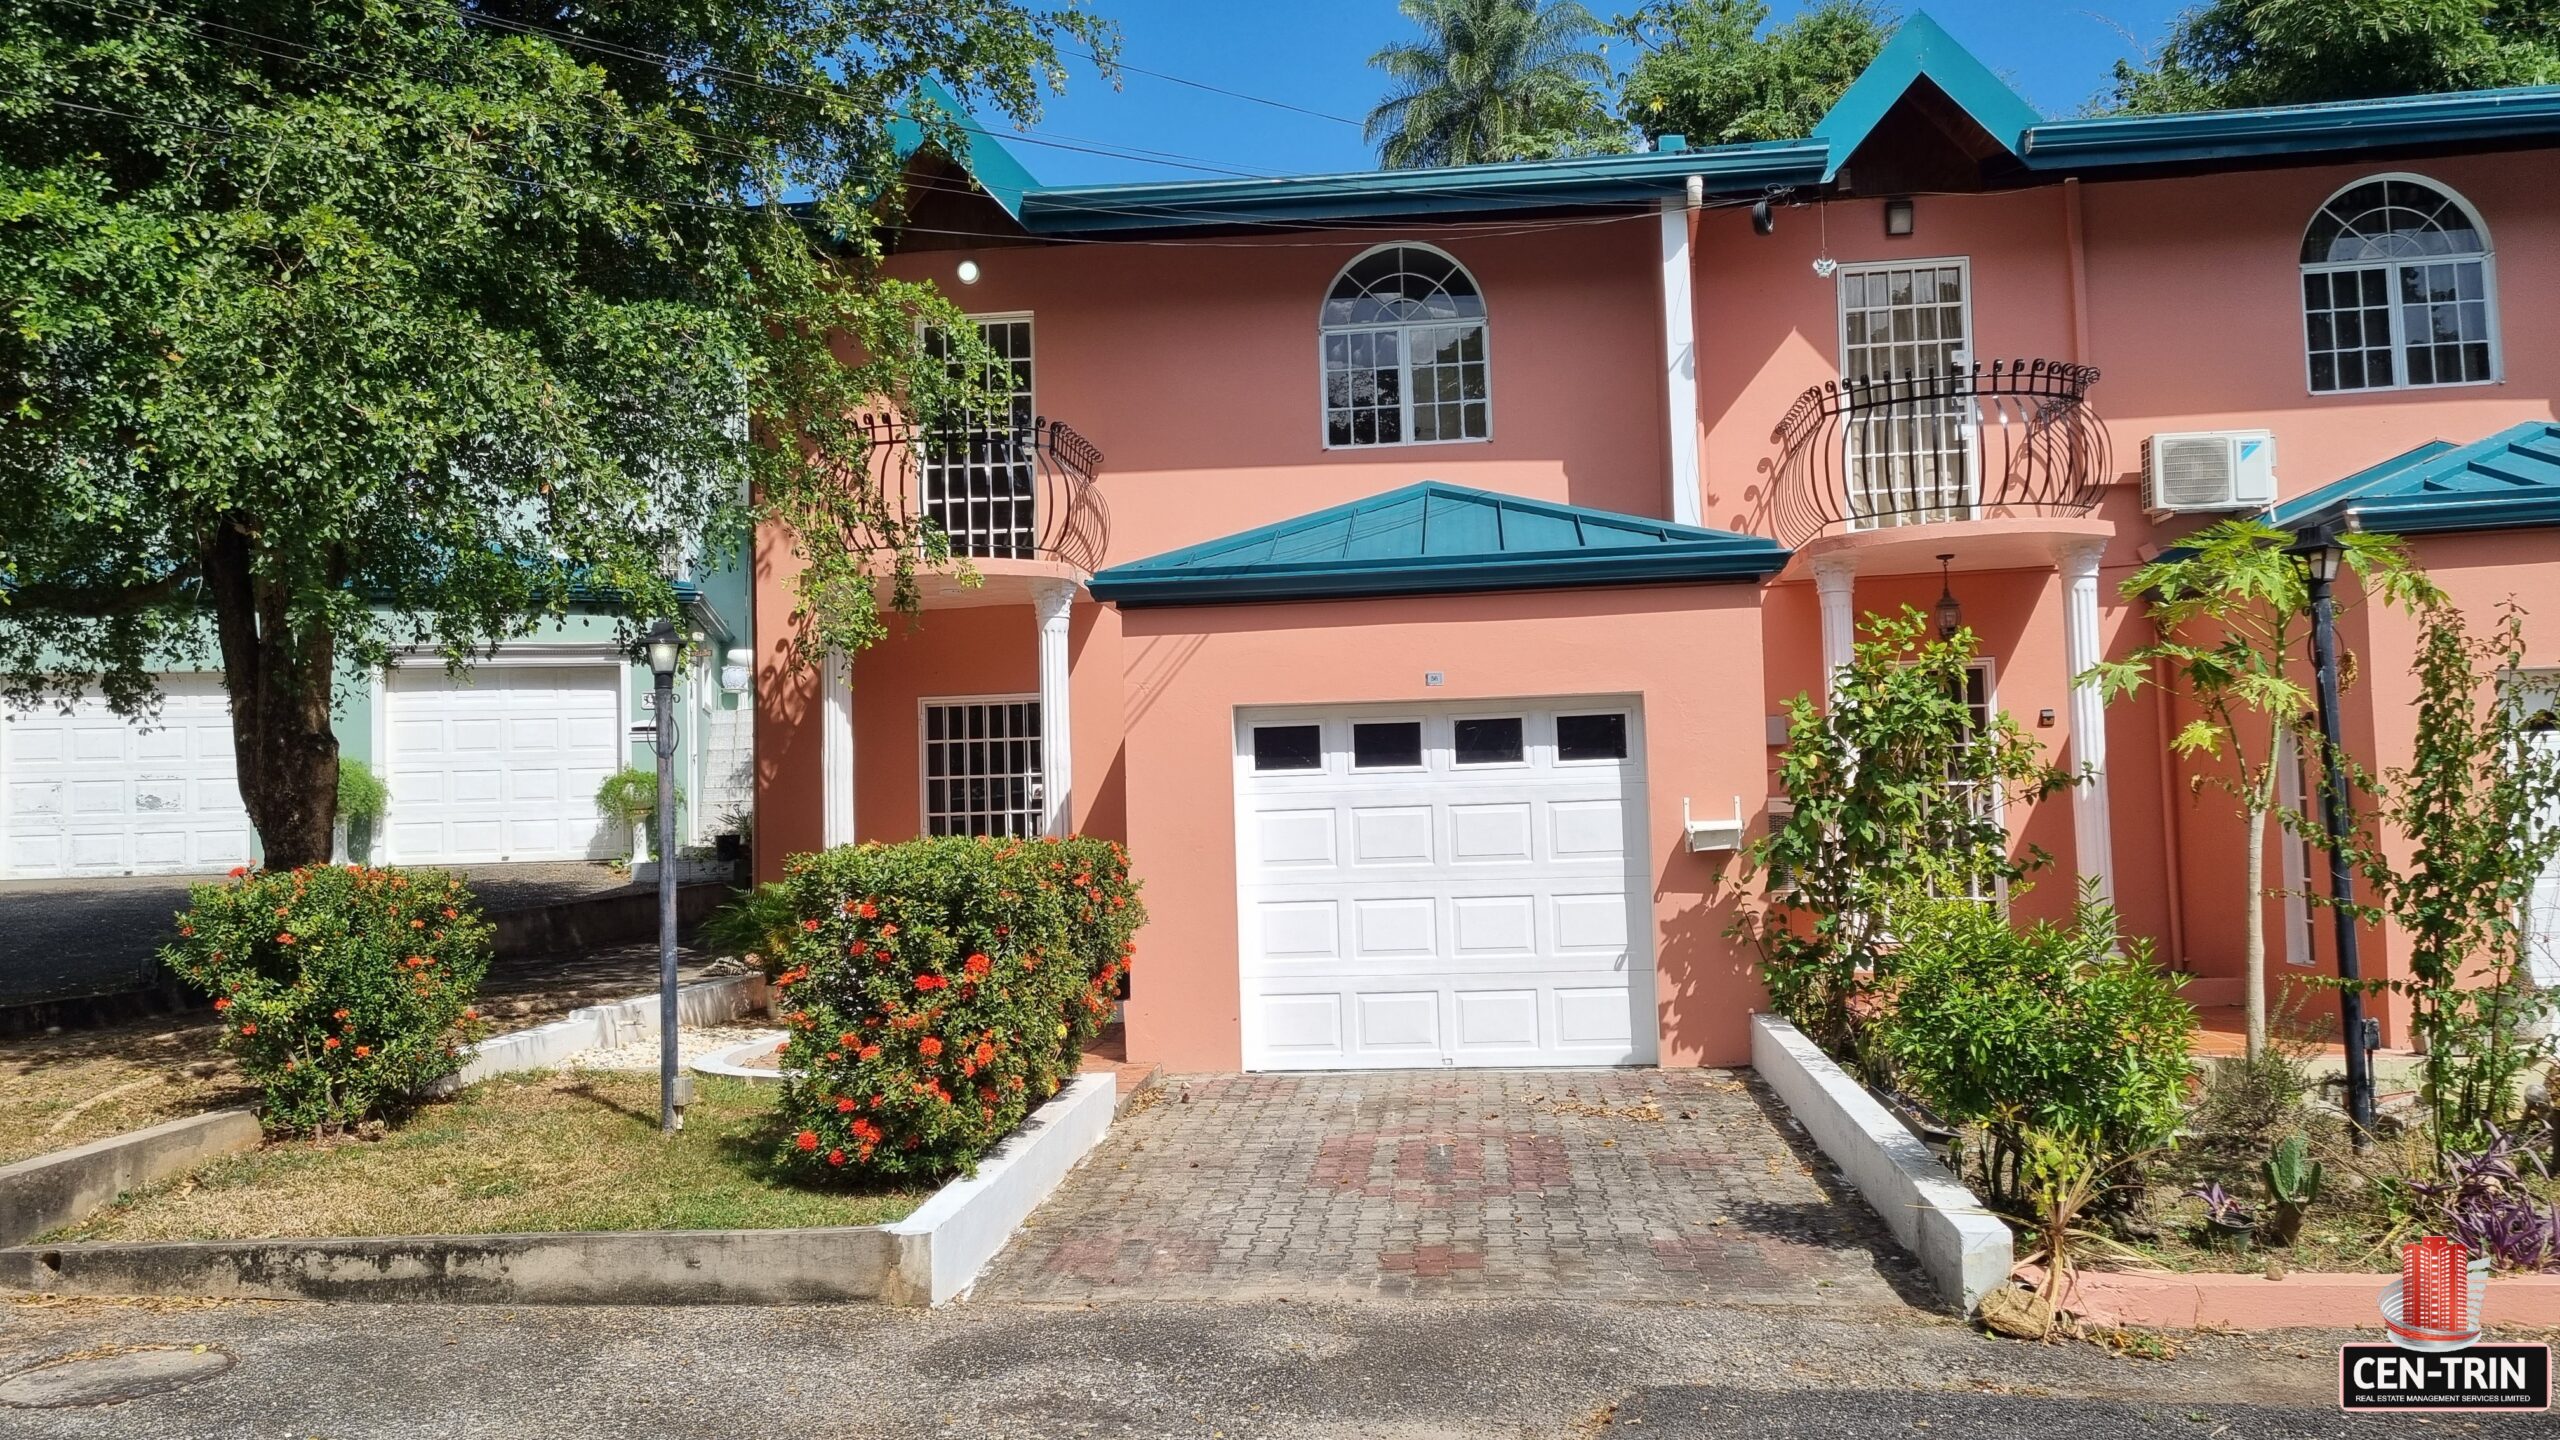 A pink three-bedroom townhouse with a white garage door.